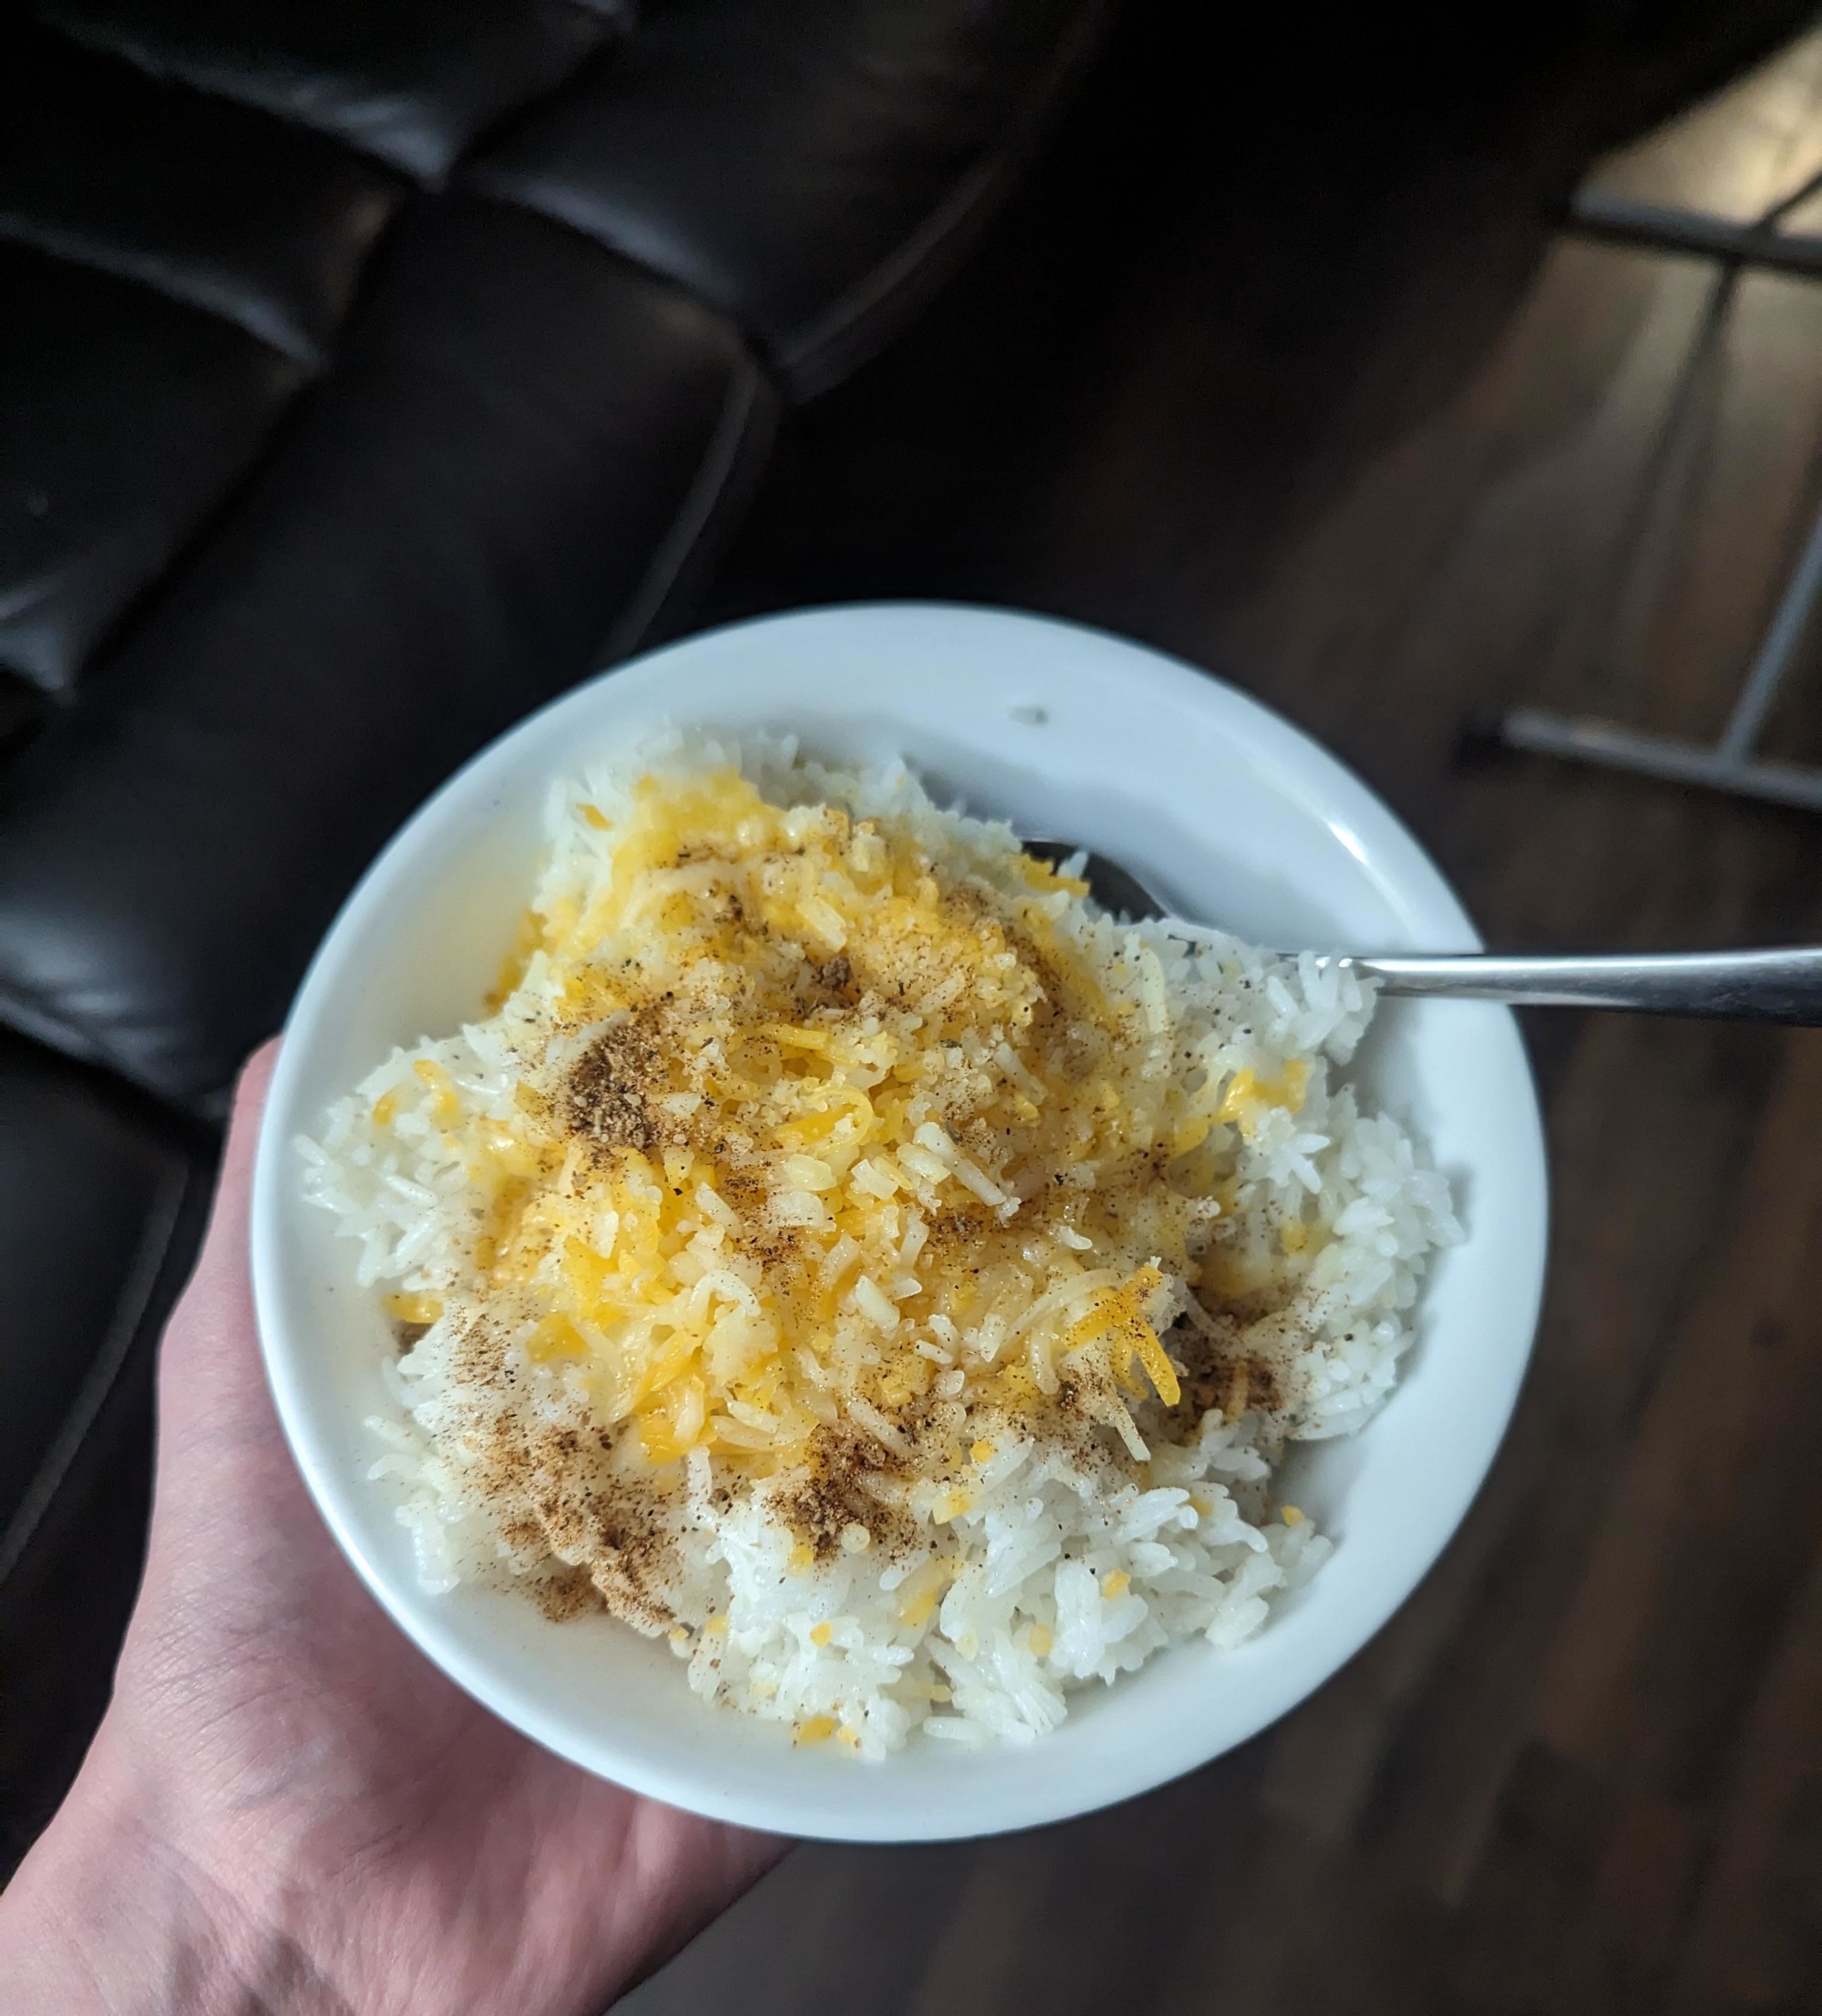 A person holding a bowl of rice topped with cheese and seasonings, viewed from above